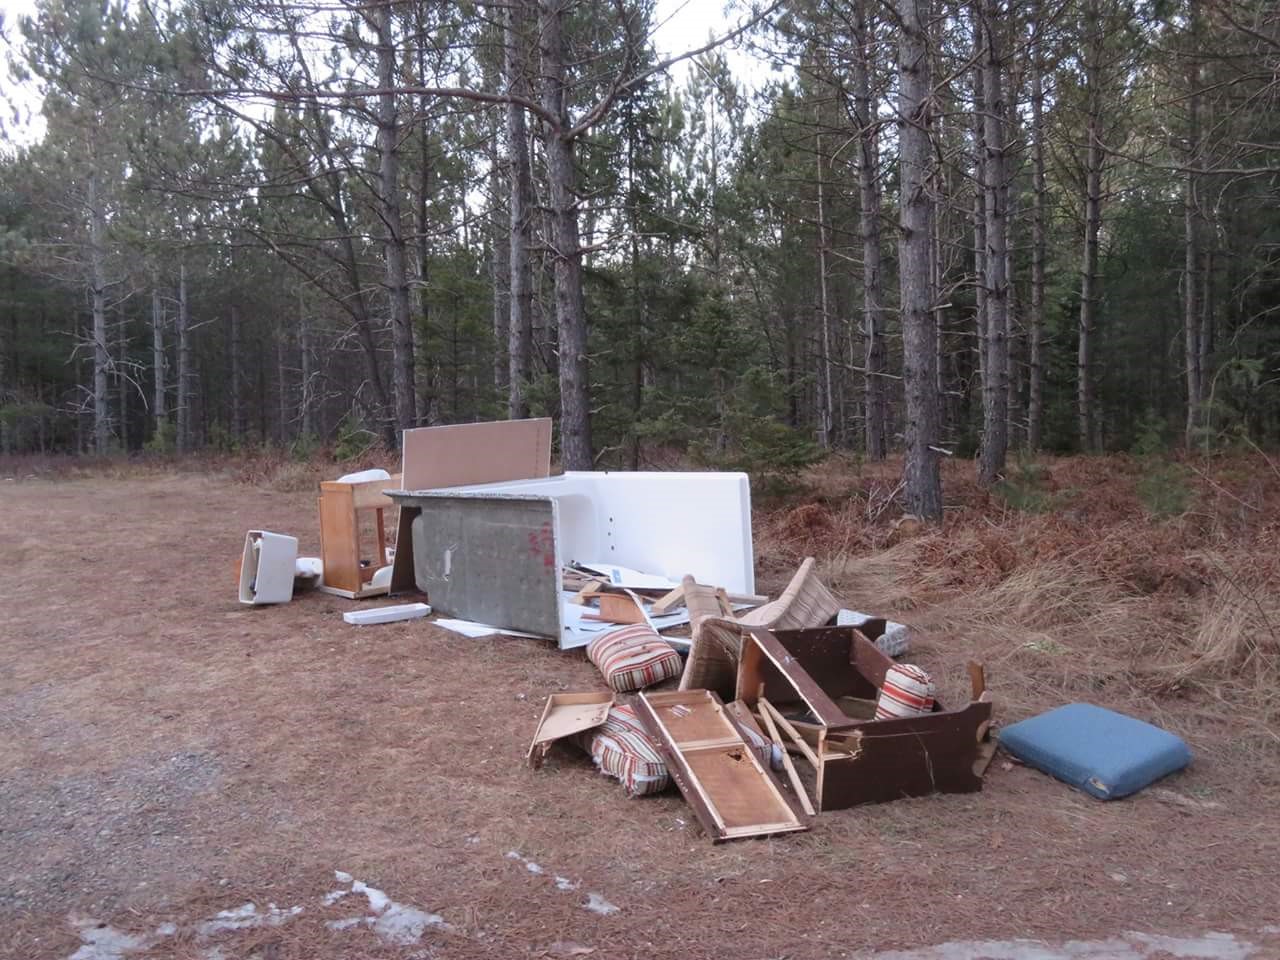 furniture litters the Chequamegon-Nicolet National Forest